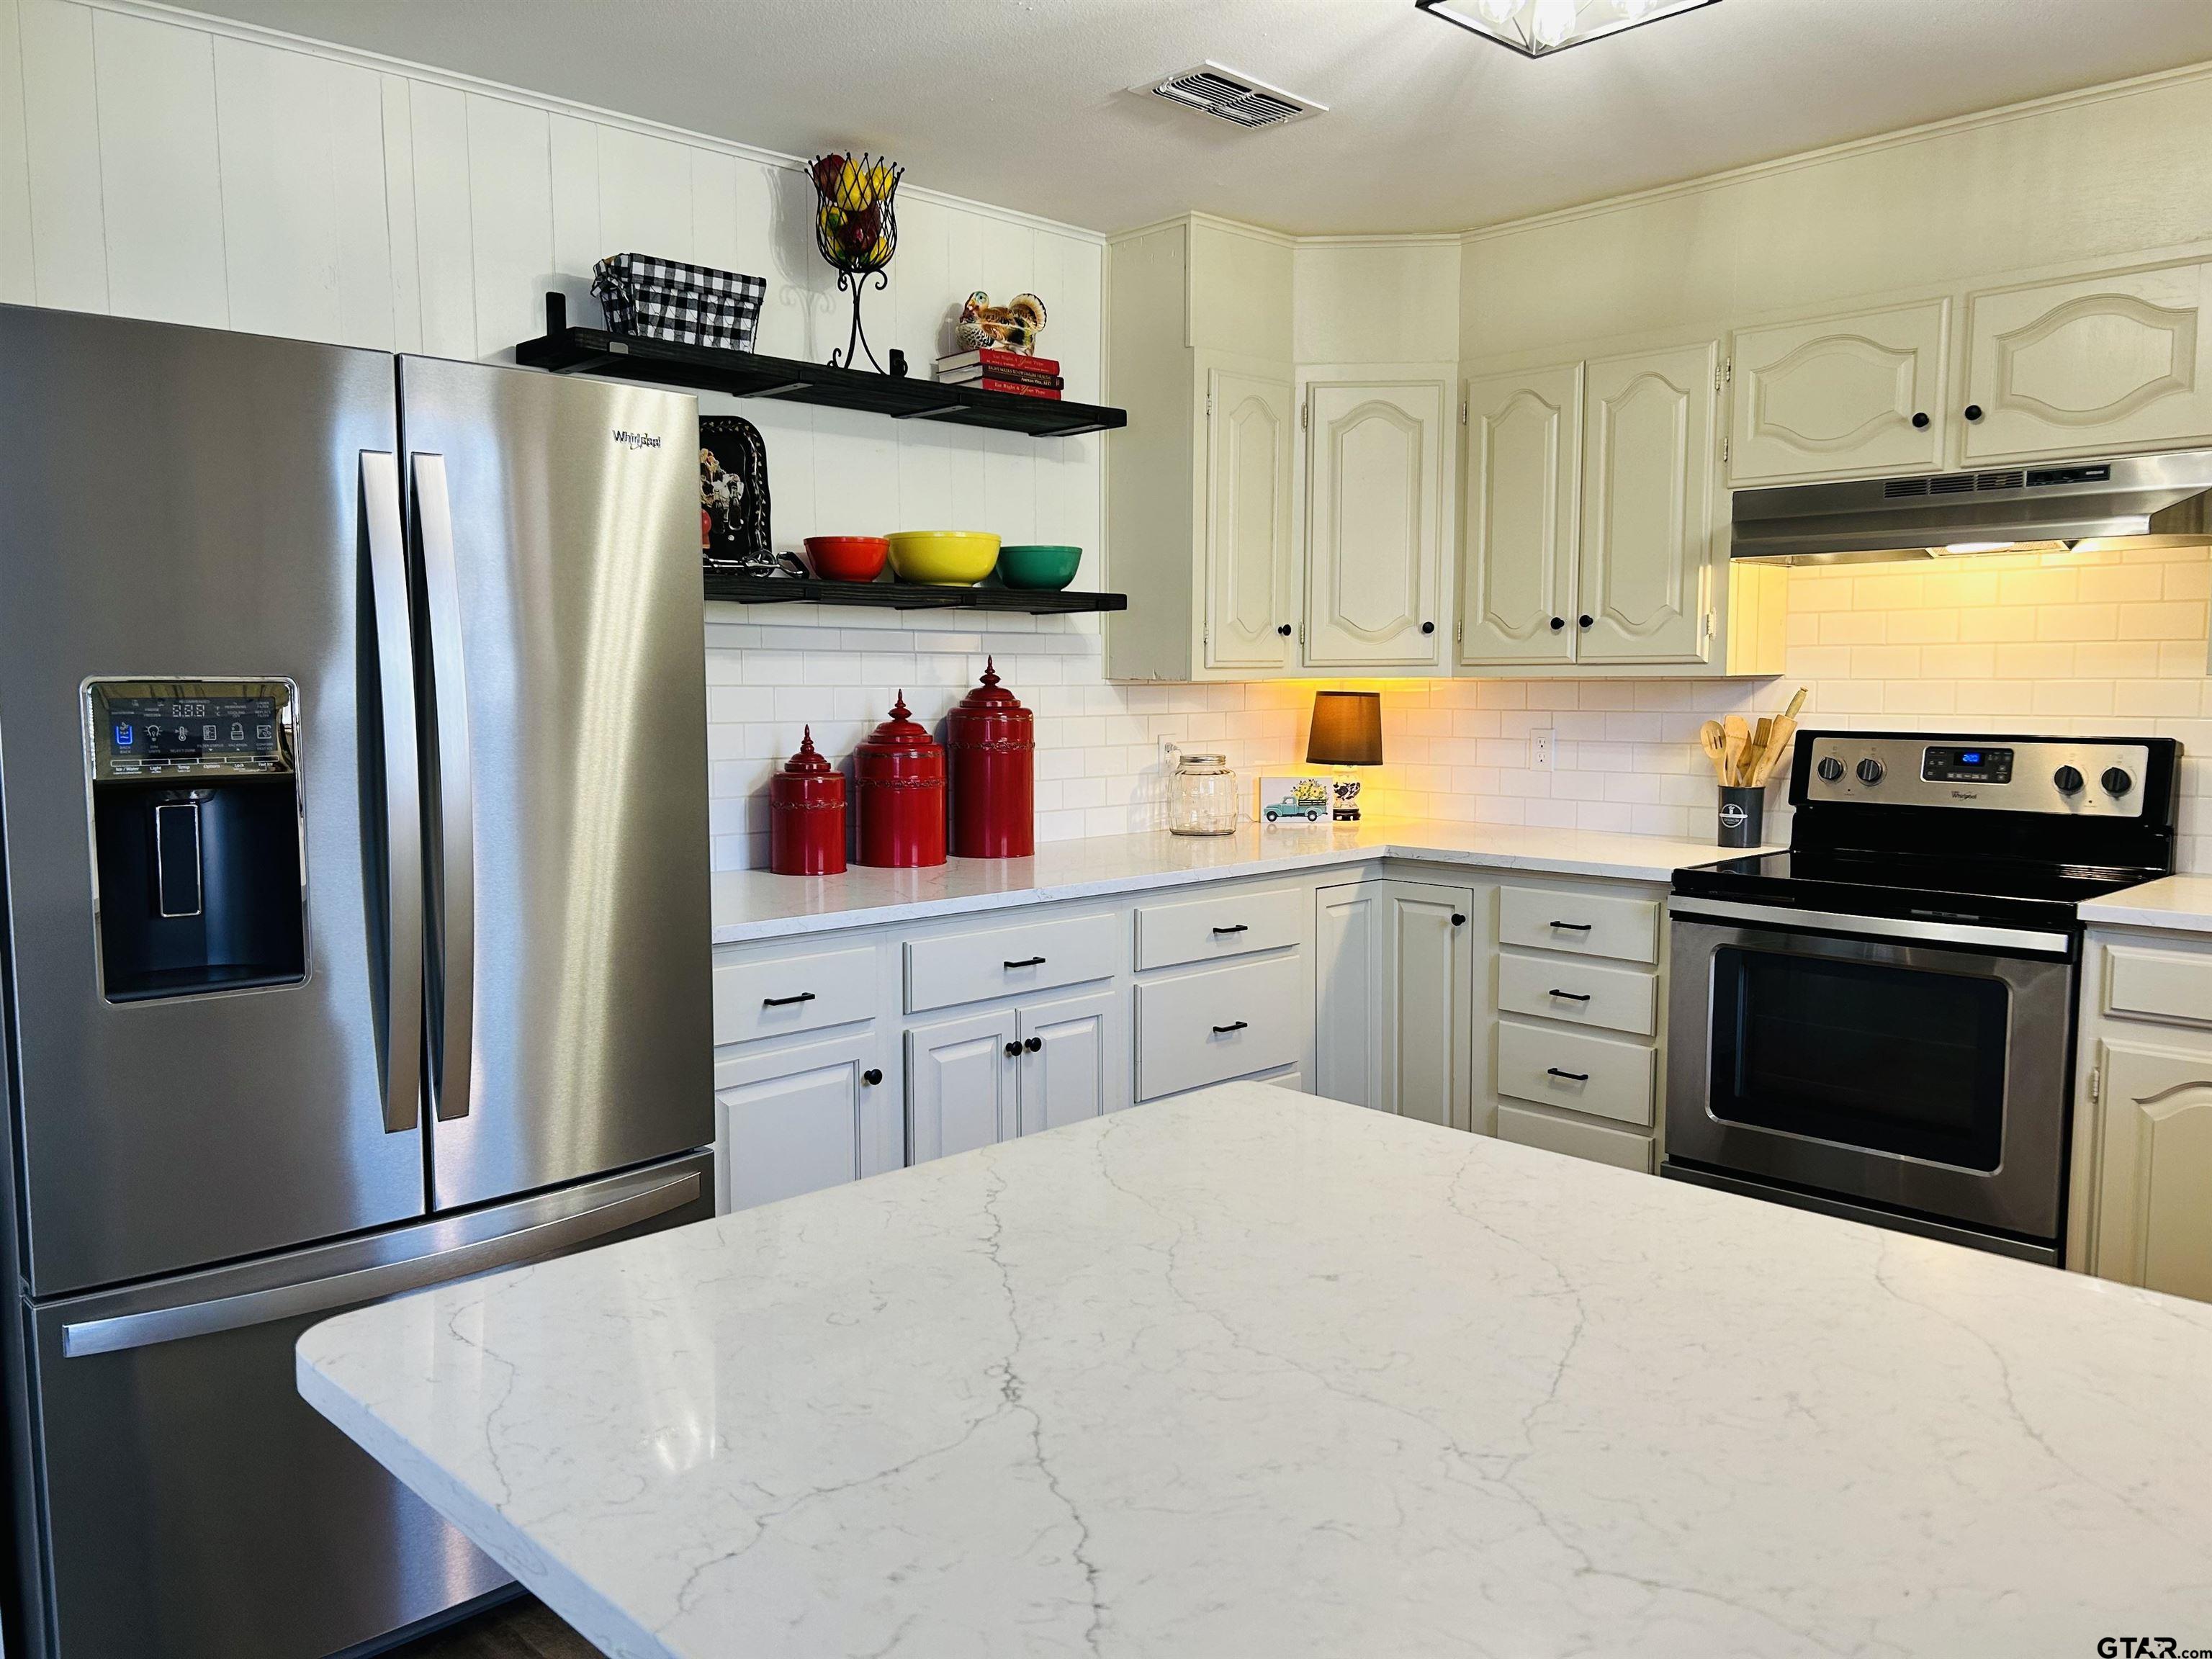 a kitchen with stainless steel appliances a stove refrigerator and cabinets